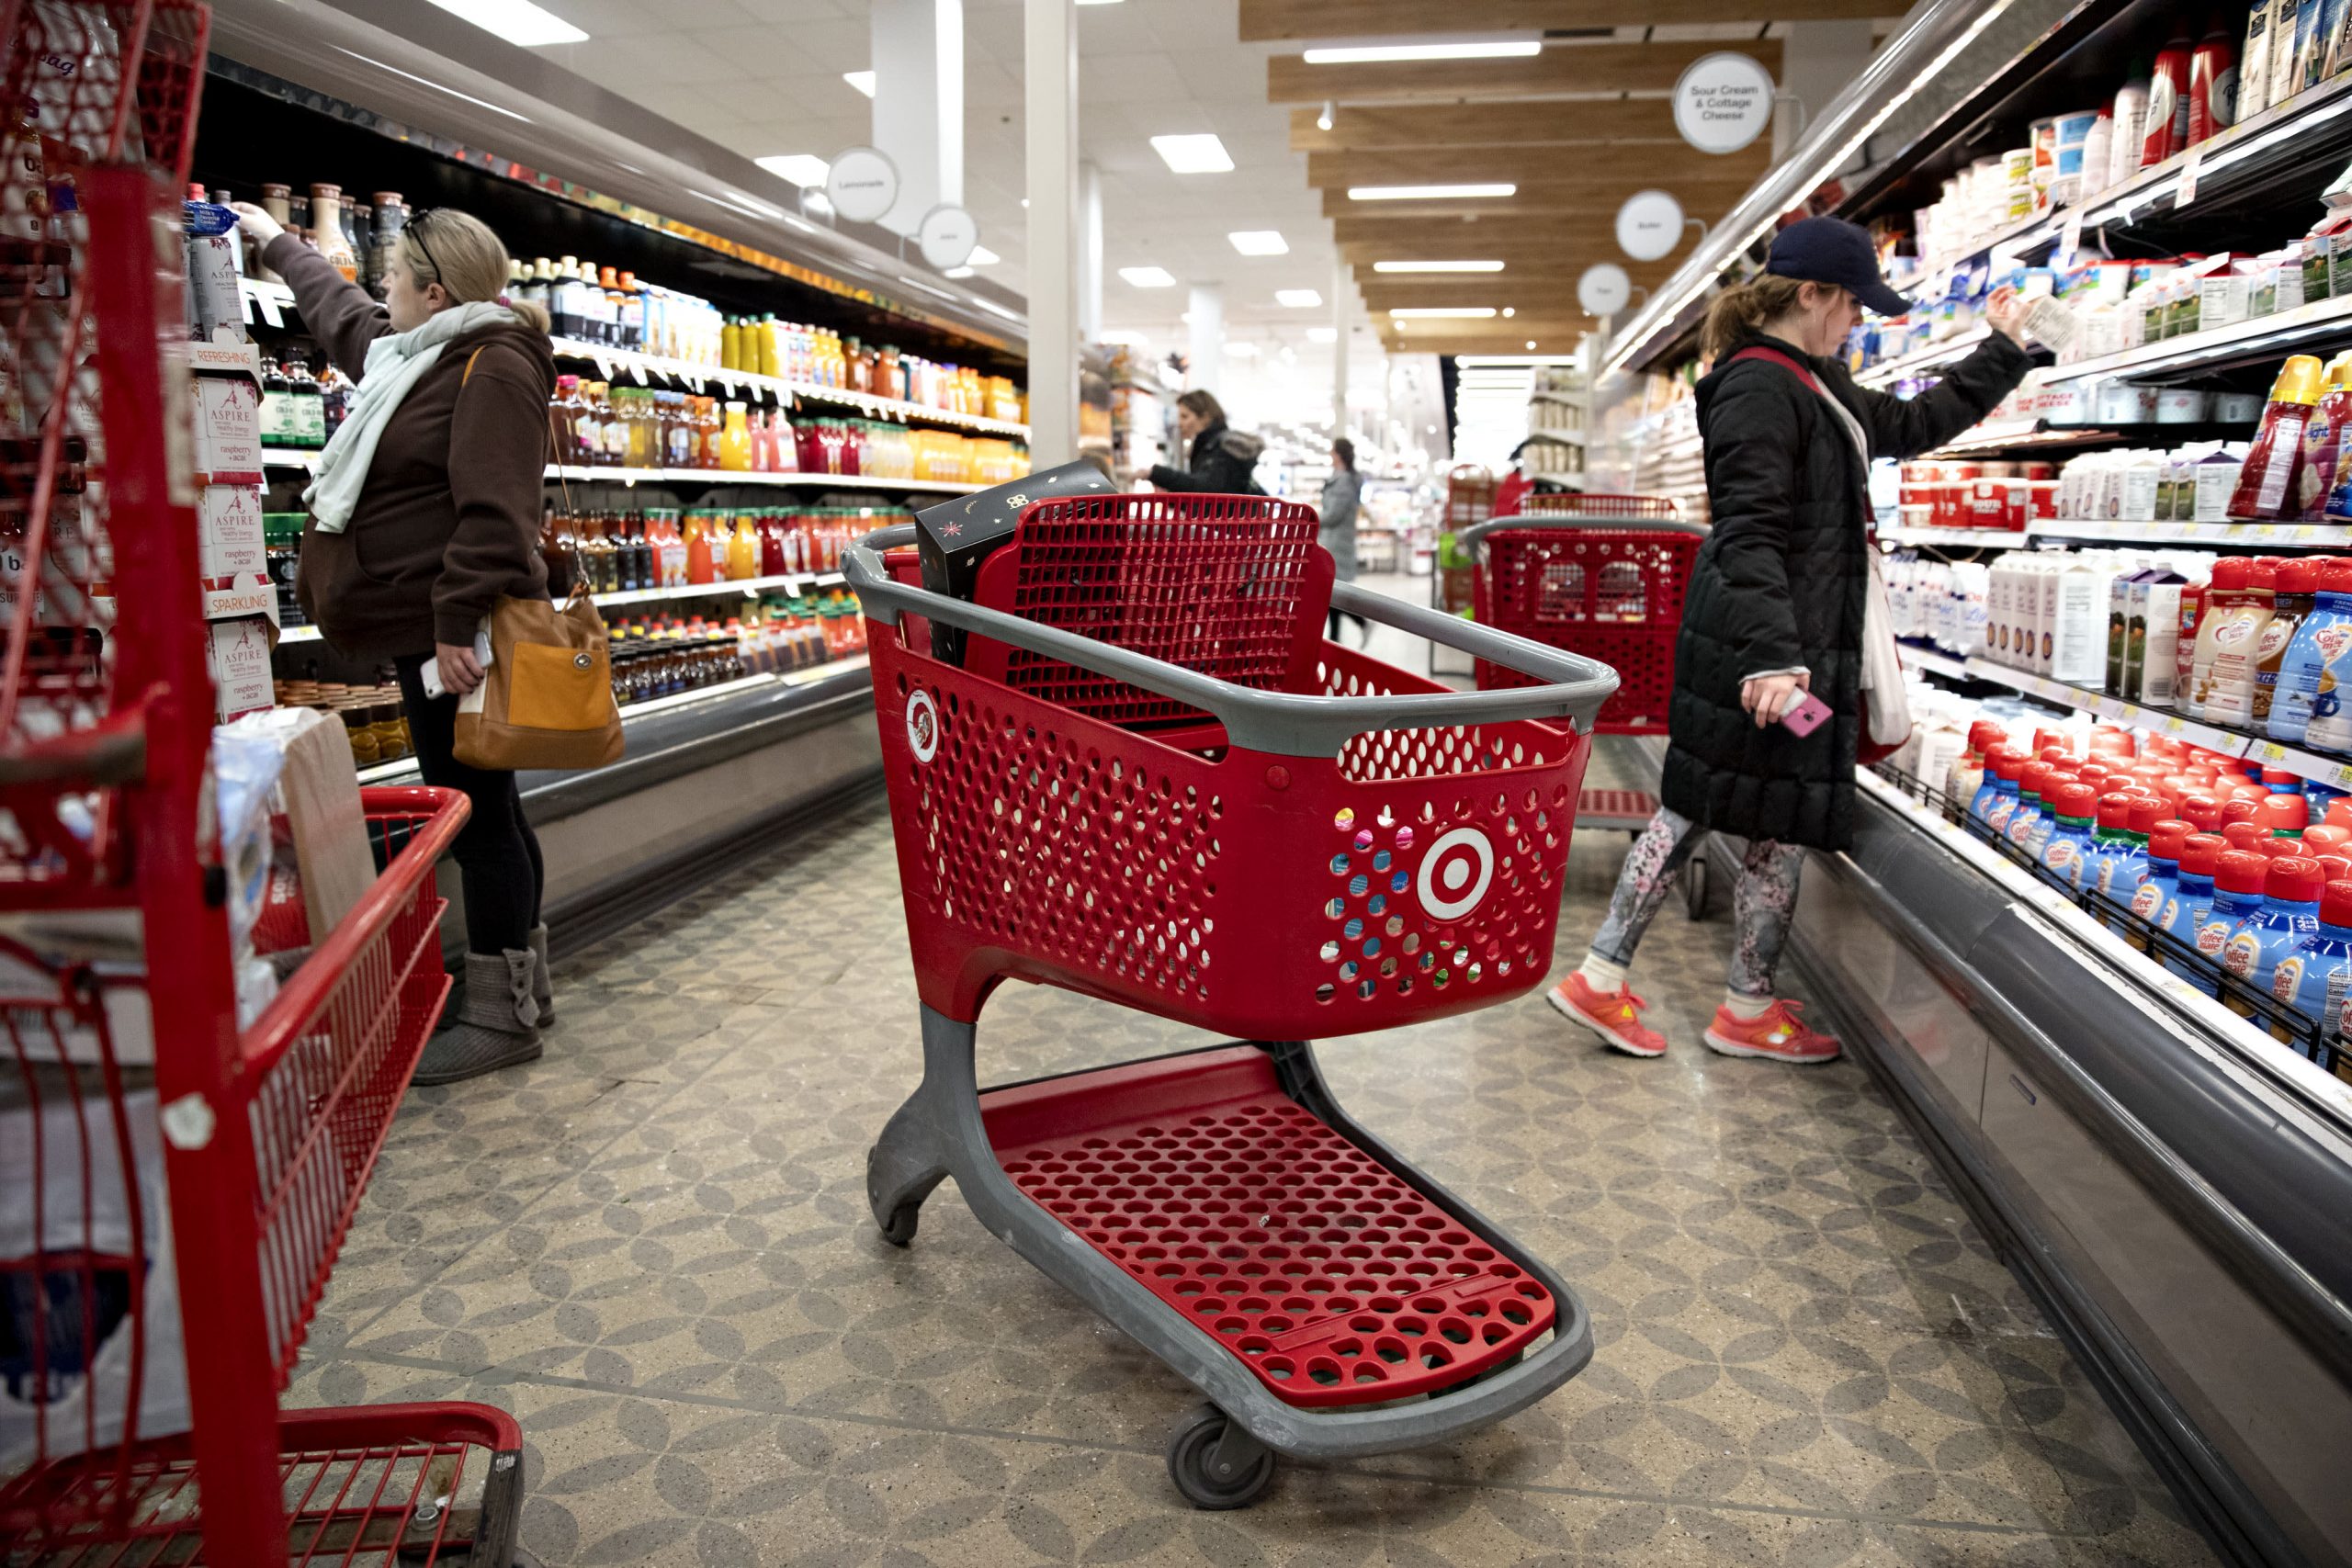 Americans are dining out again. Target wants to lure them to the grocery aisle with deals